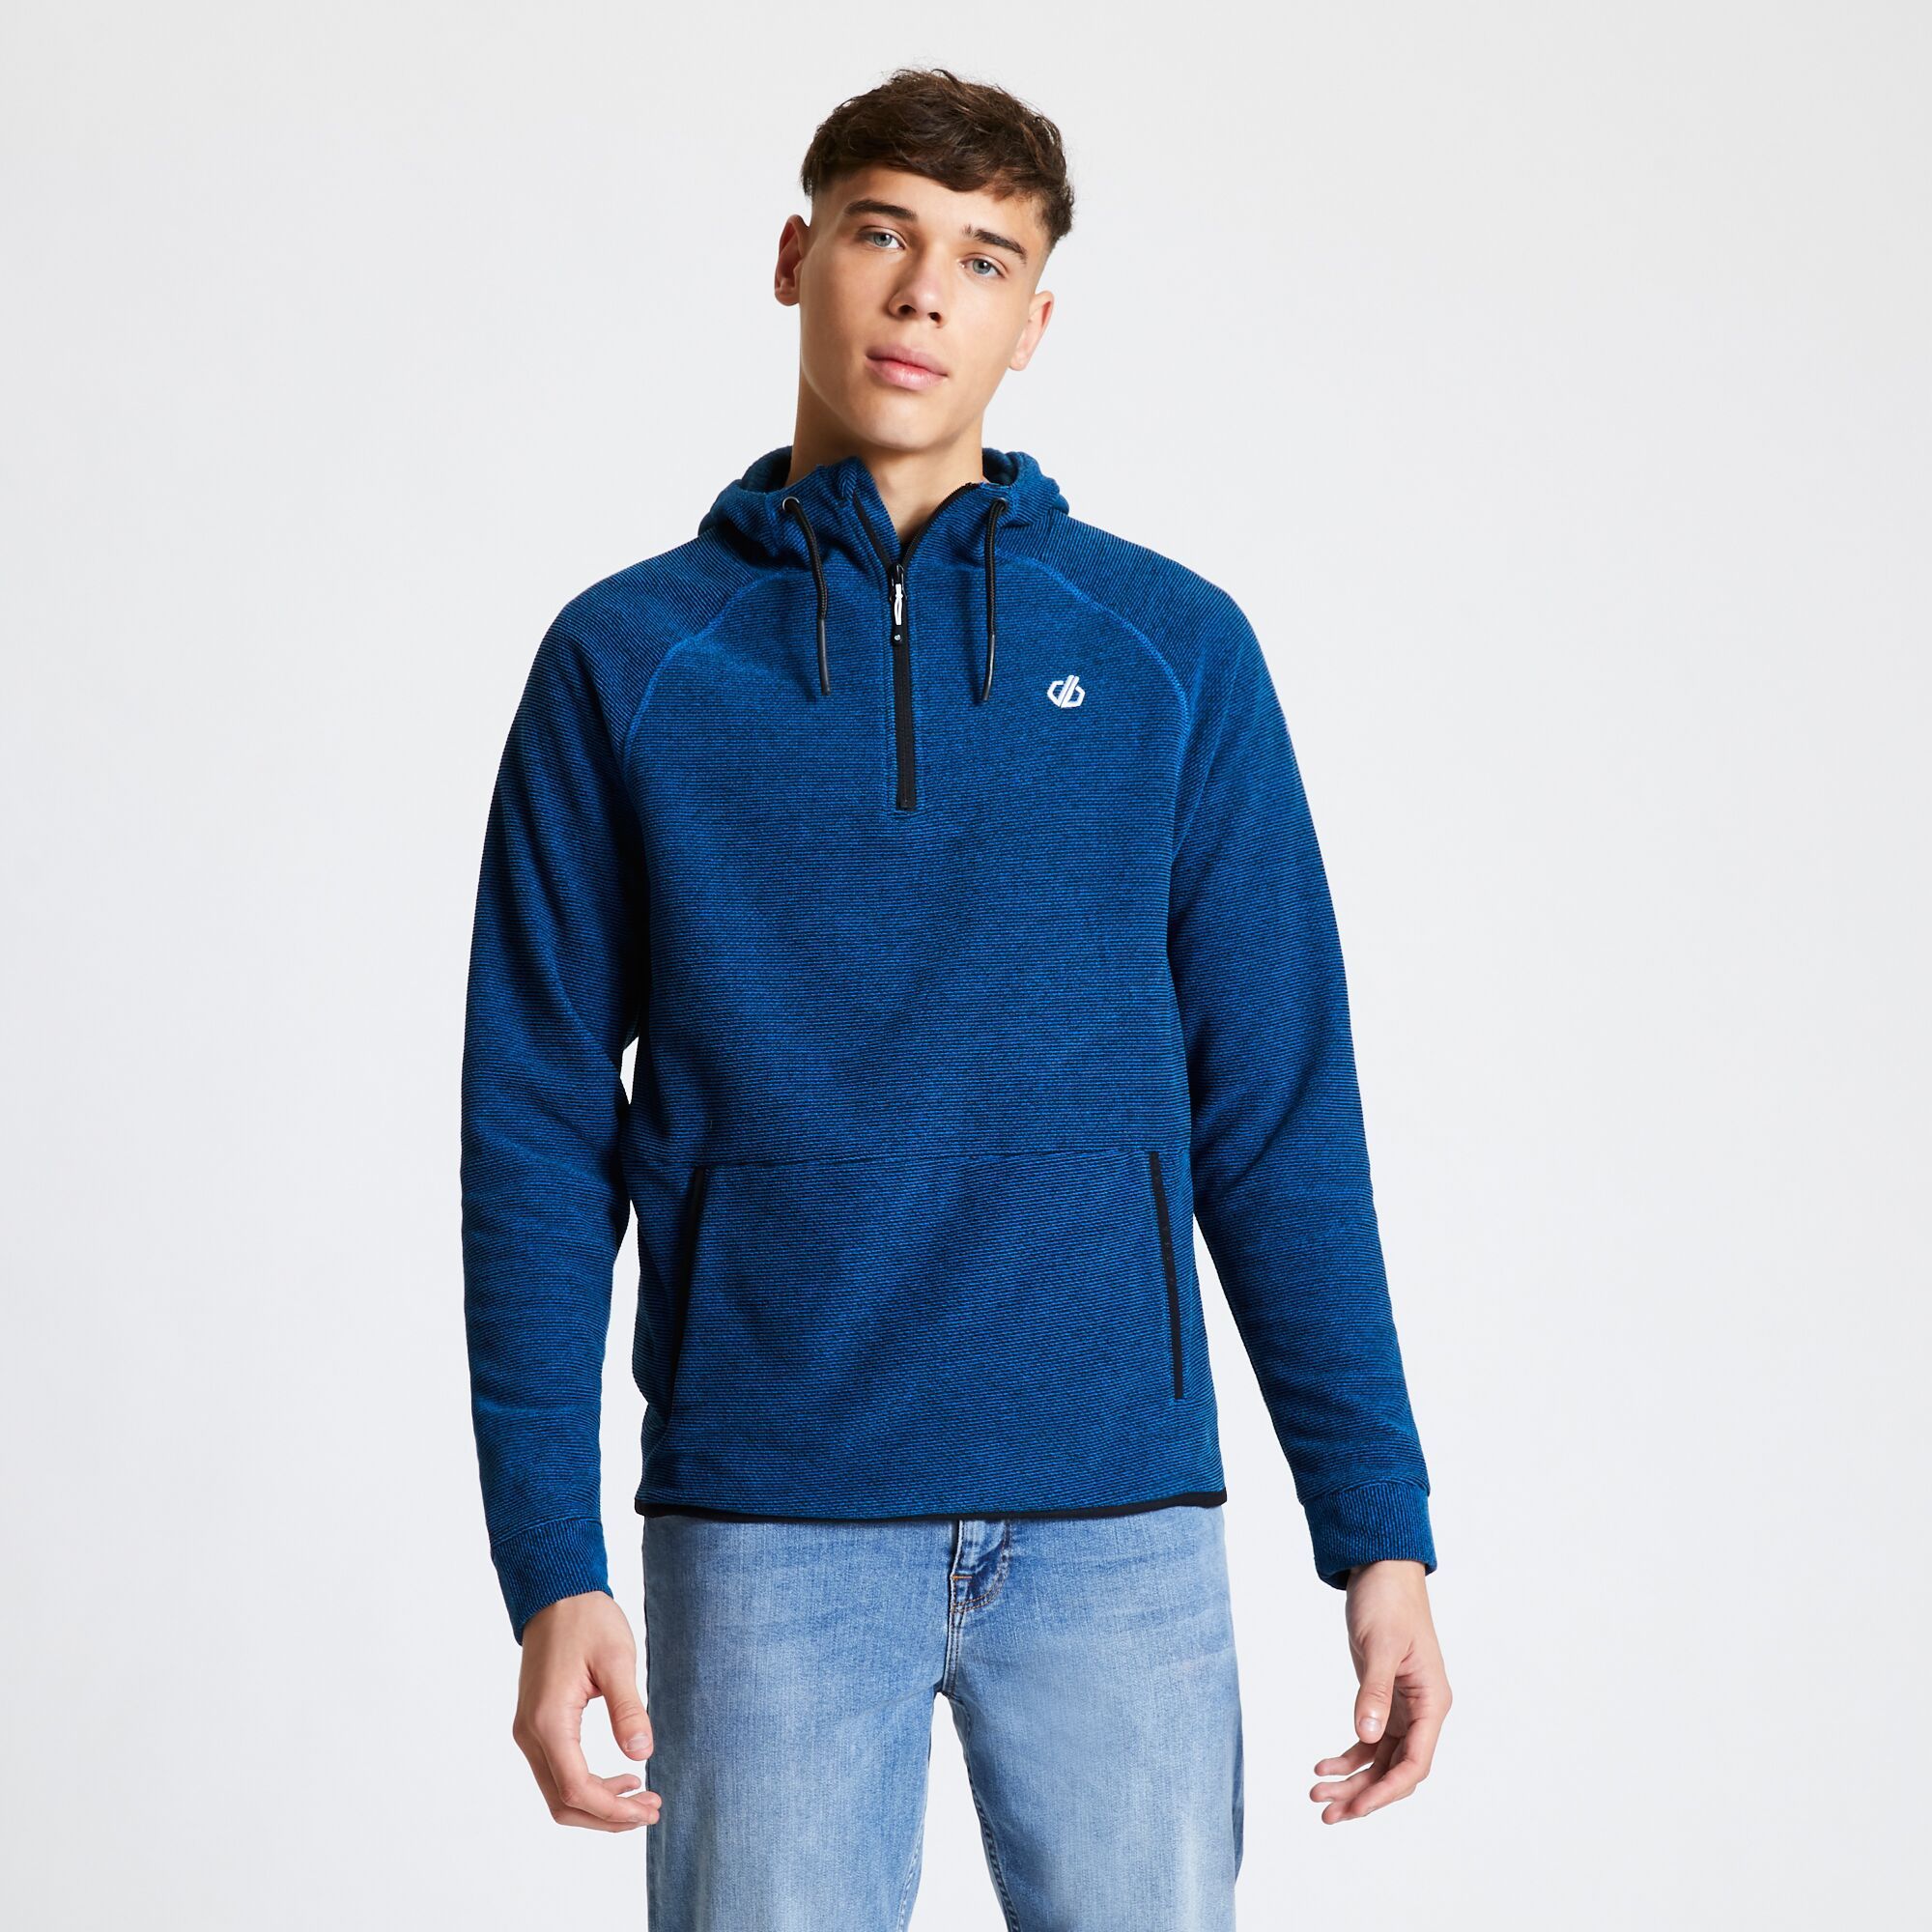 Material: 100% Polyester. Supremely soft hooded fleece with drawcord adjusters. Half zip. Kangaroo pocket to front. Sports-stretch binding around the hem.